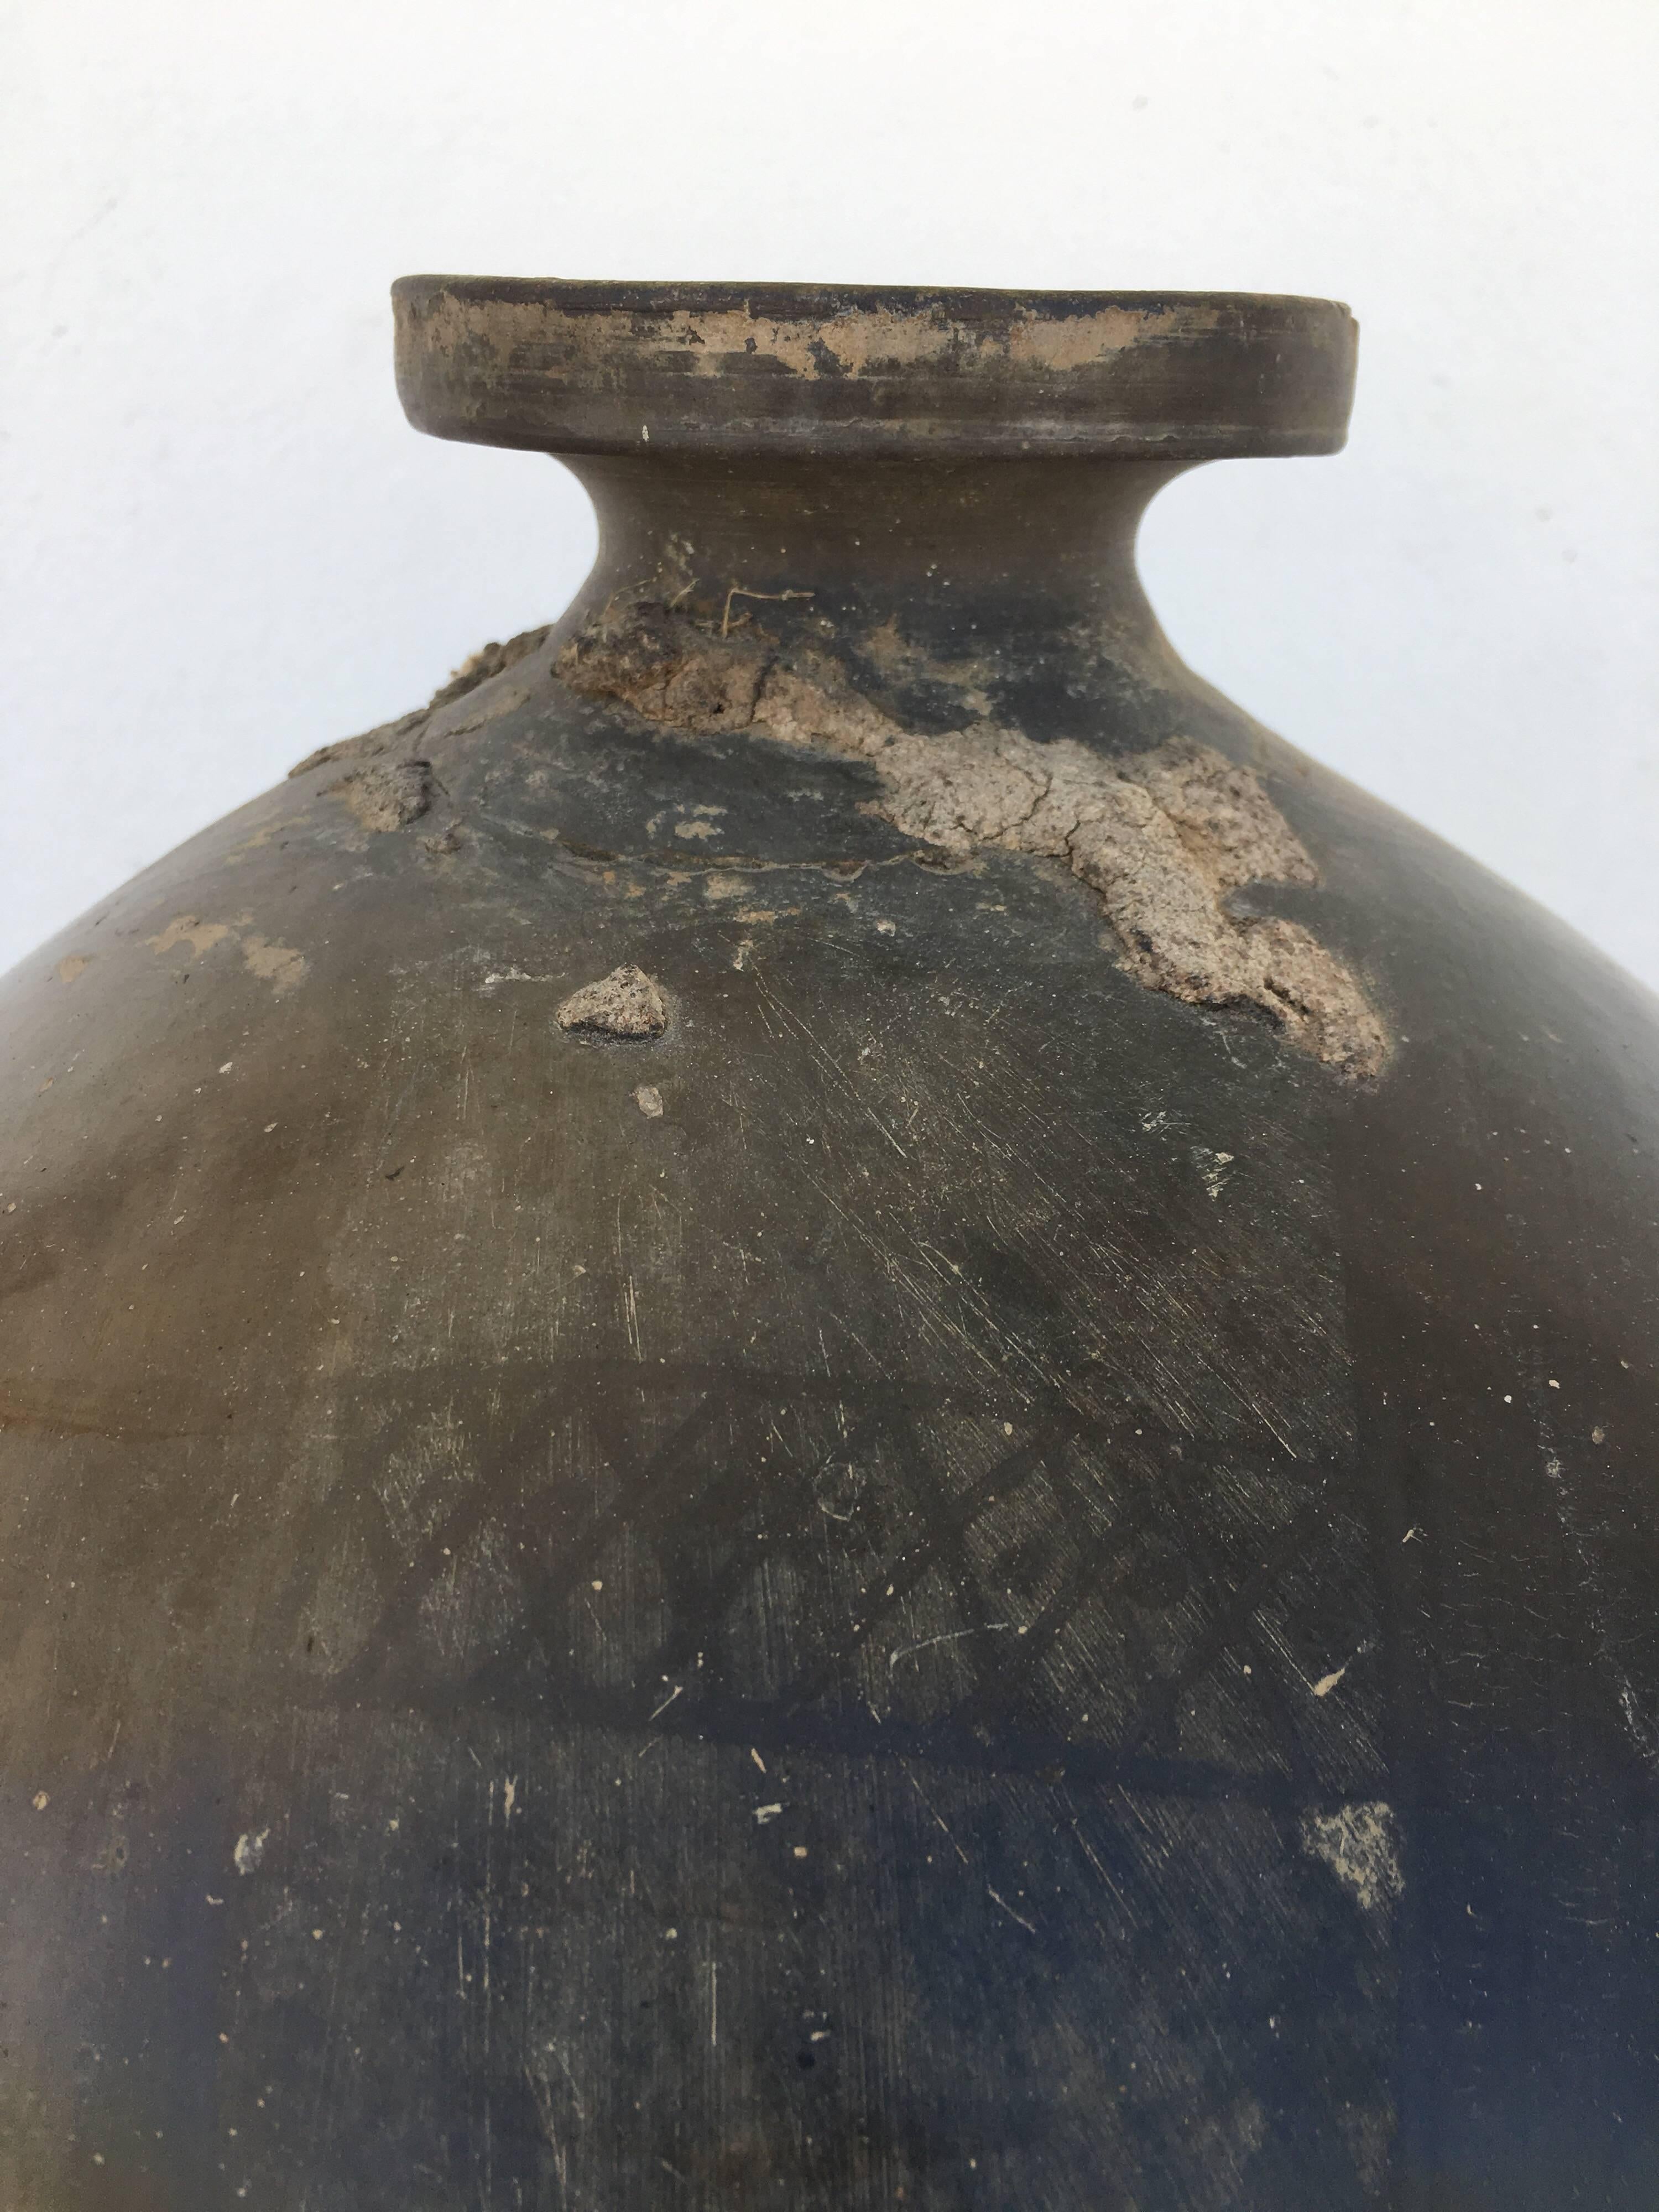 Black clay teardrop ceramic clay jug from the 1950s. Visible original markings by artisan the most important being a drawing of a flower and leaves. The neck was repaired at one point by the mezcal producer that purchased this container as a means